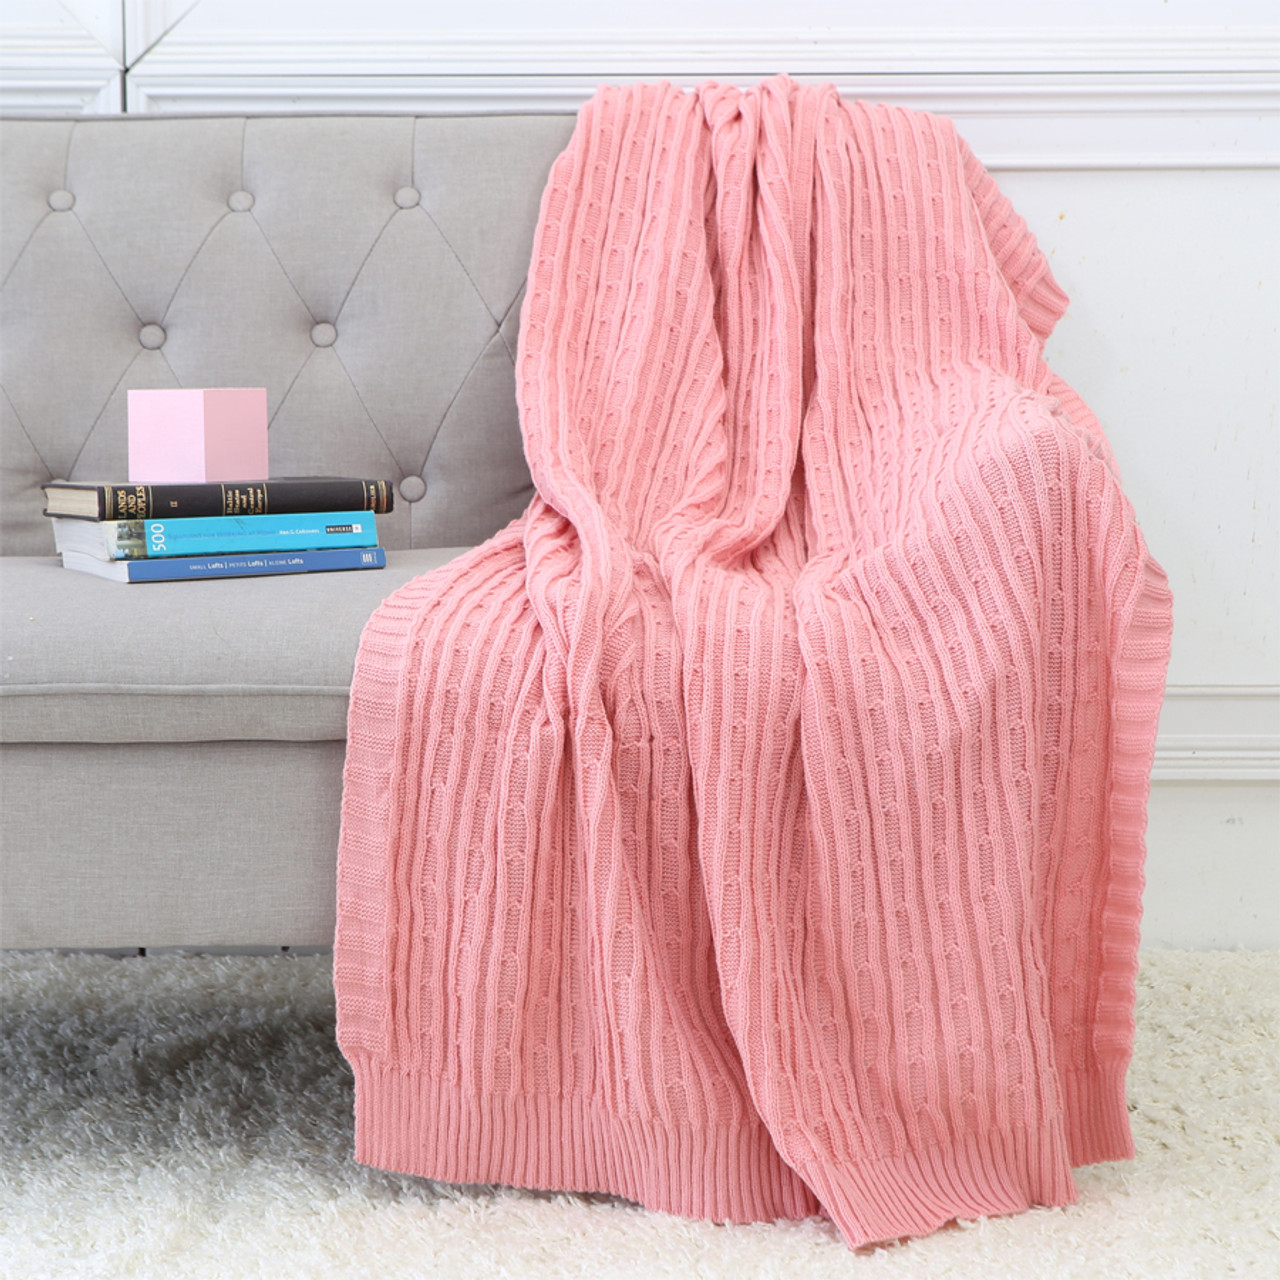 Legacy Decor Cable Knit Sweater Design Soft Lightweight Throw Blanket, Blue, Pink, or Sage 50” x 60” or Charcoal, Ivory 50” x 70” with Tassels 